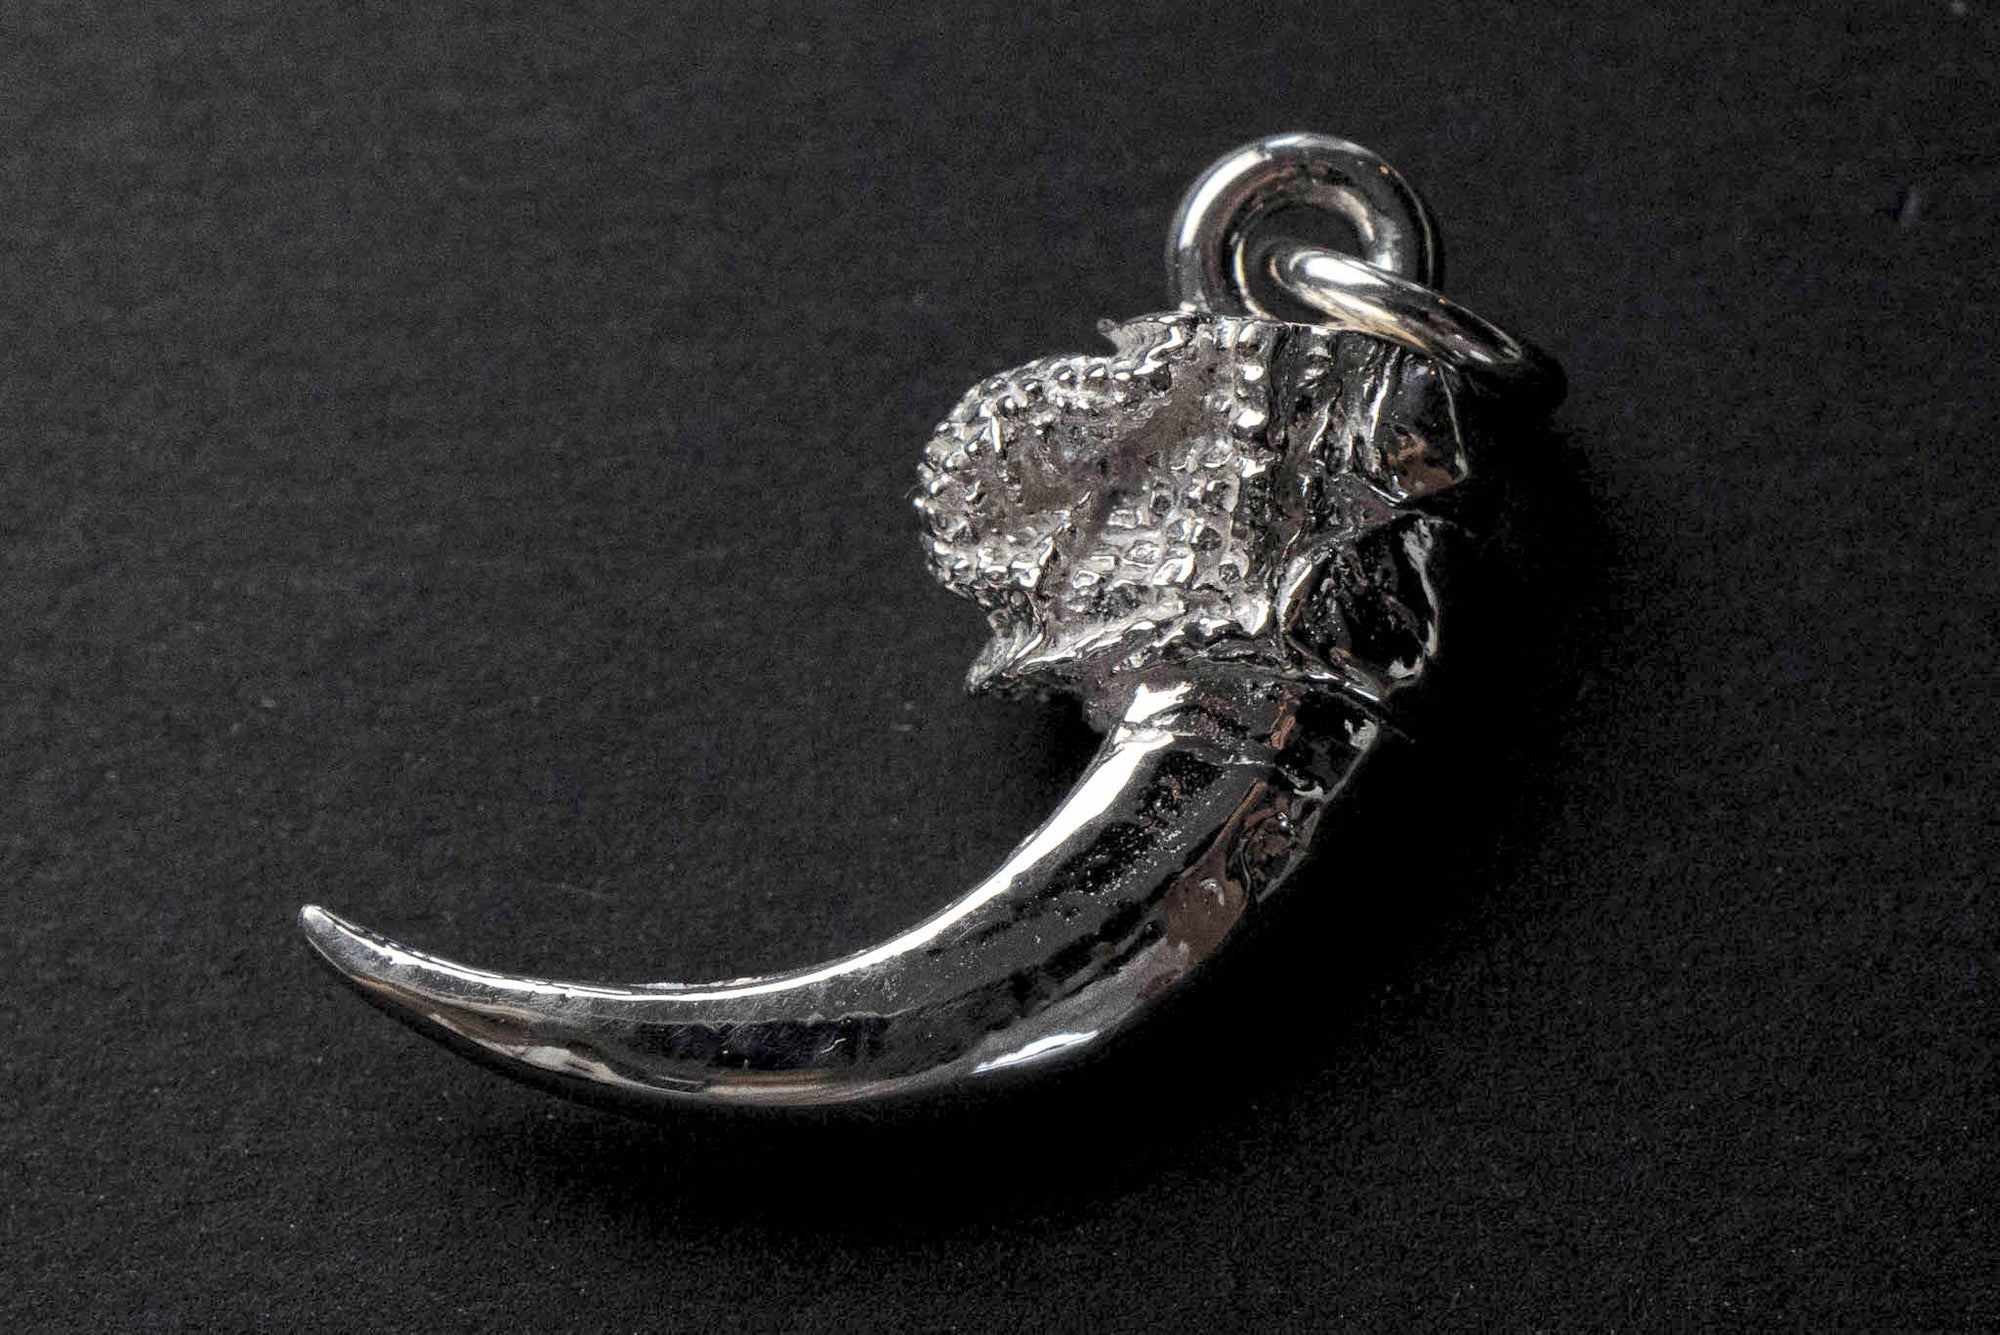 First Arrow's Size Small "Eagle Claw" Pendant (P-030)